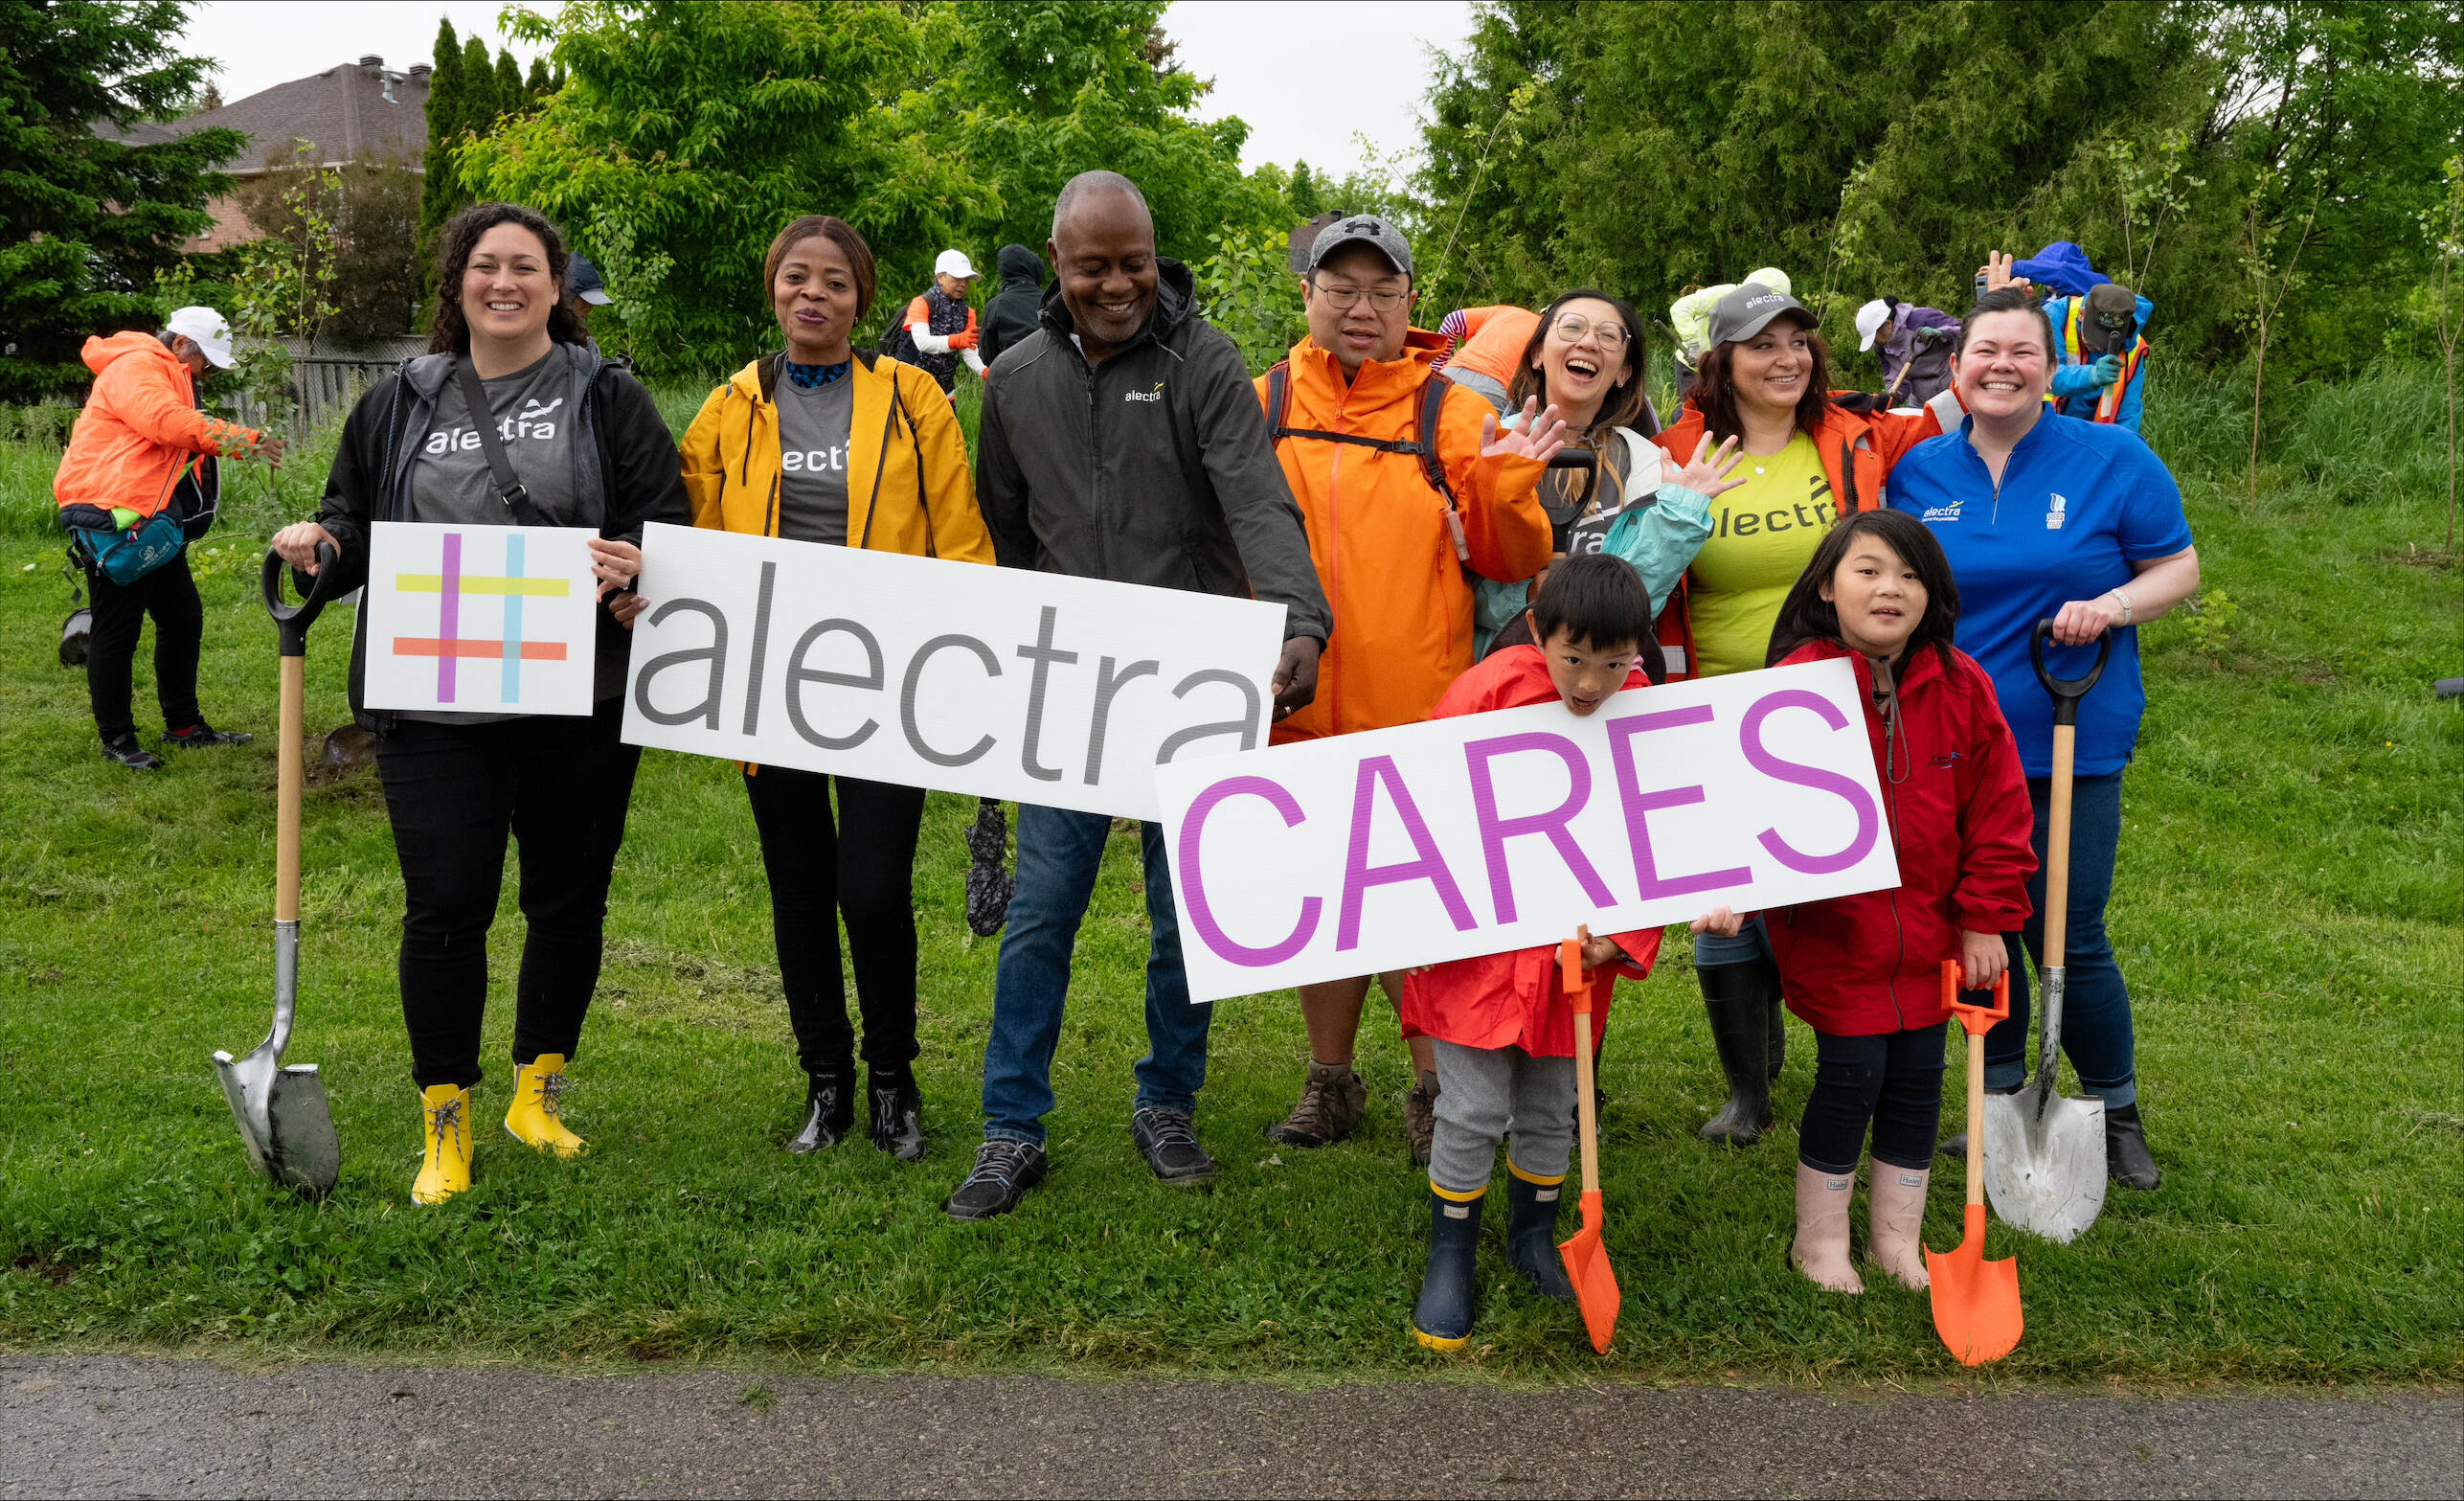 Group of people holding an Alectra Cares sign